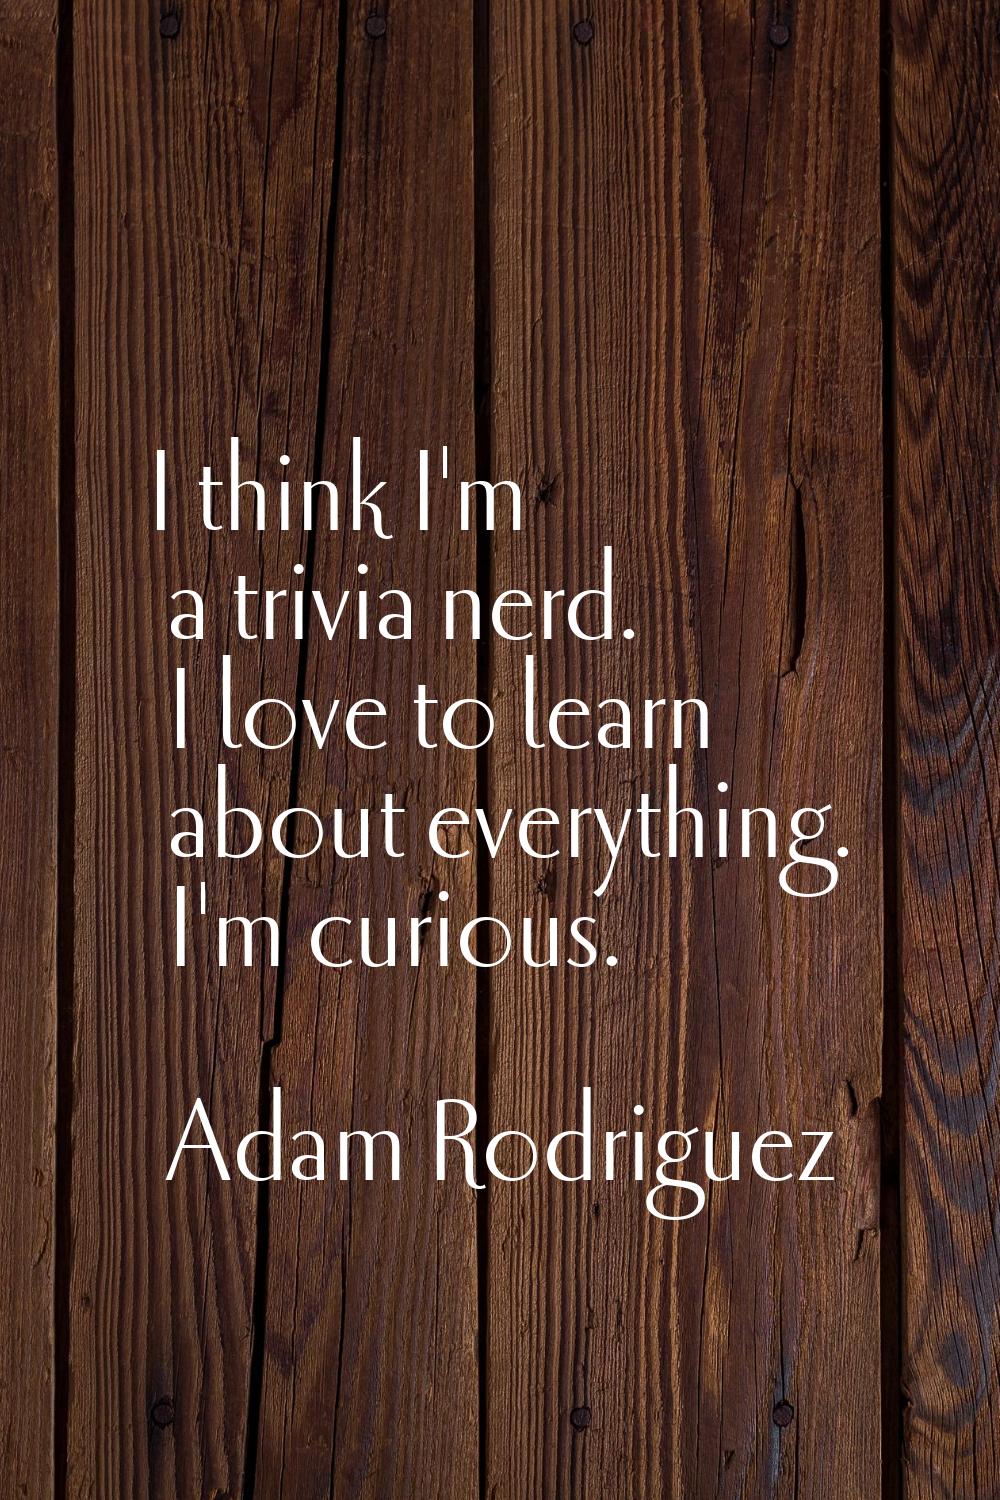 I think I'm a trivia nerd. I love to learn about everything. I'm curious.